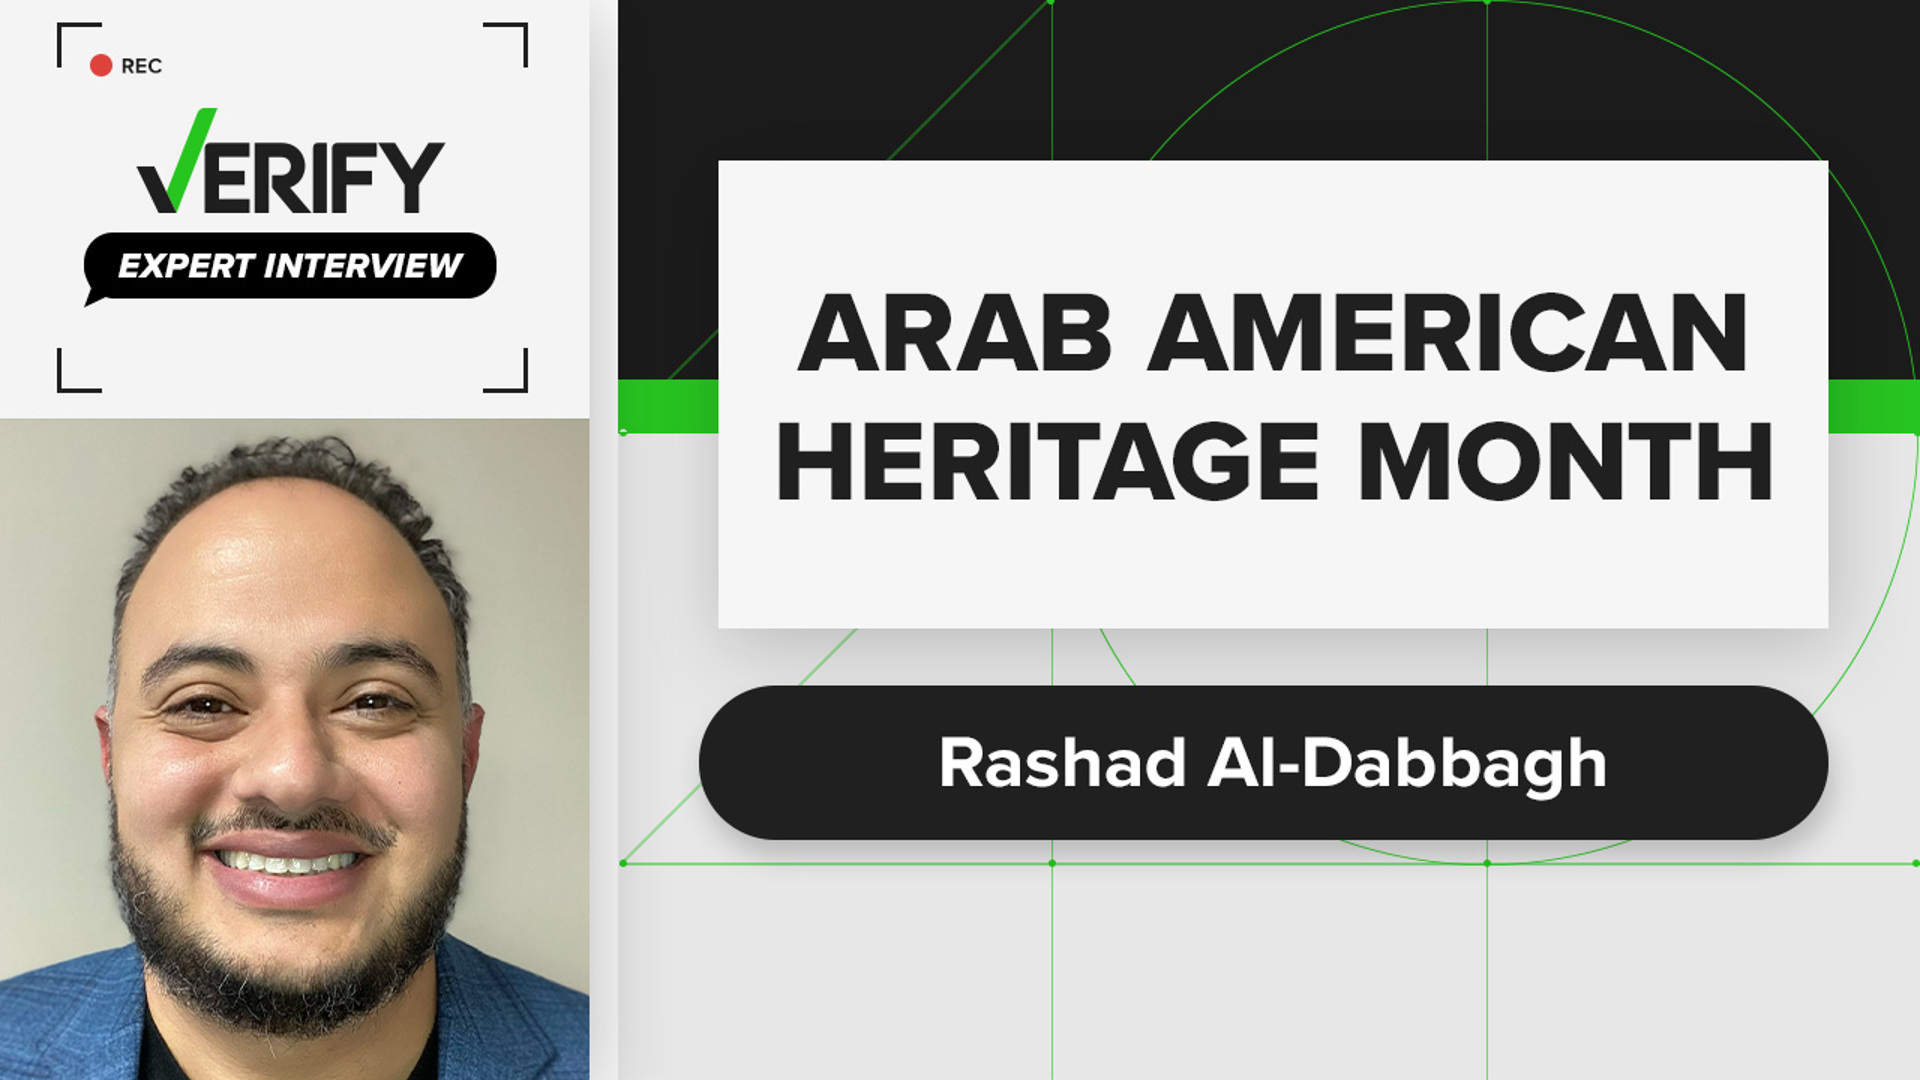 Rashad Al-Dabbagh talks about the impact and importance of Arab American Heritage Month becoming federally recognized.